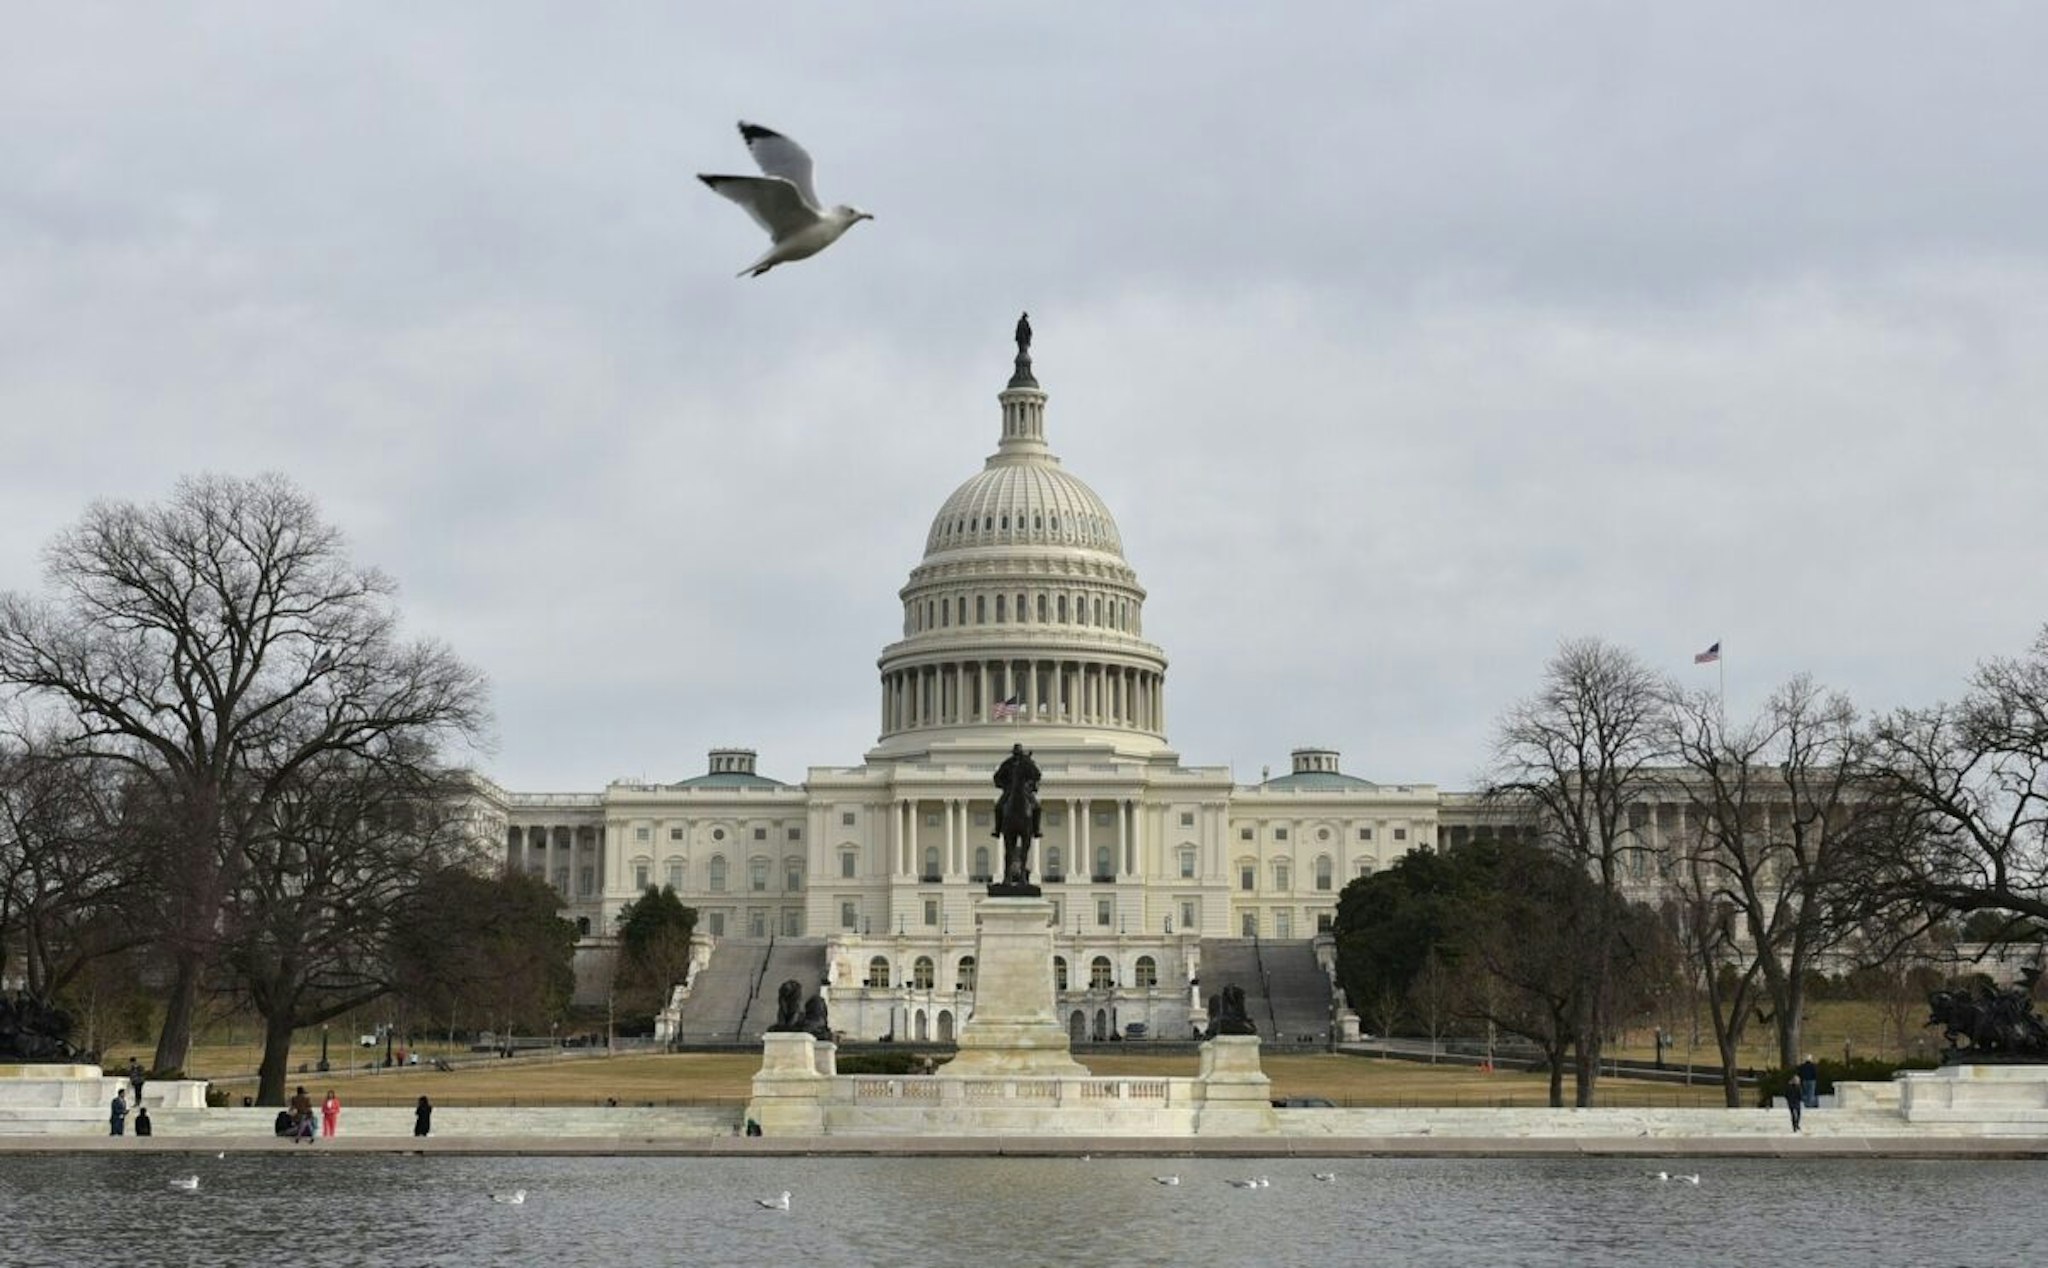 The US Capitol is seen in Washington, DC on January 22, 2018 after the US Senate reached a deal to reopen the federal government, with Democrats accepting a compromise spending bill.